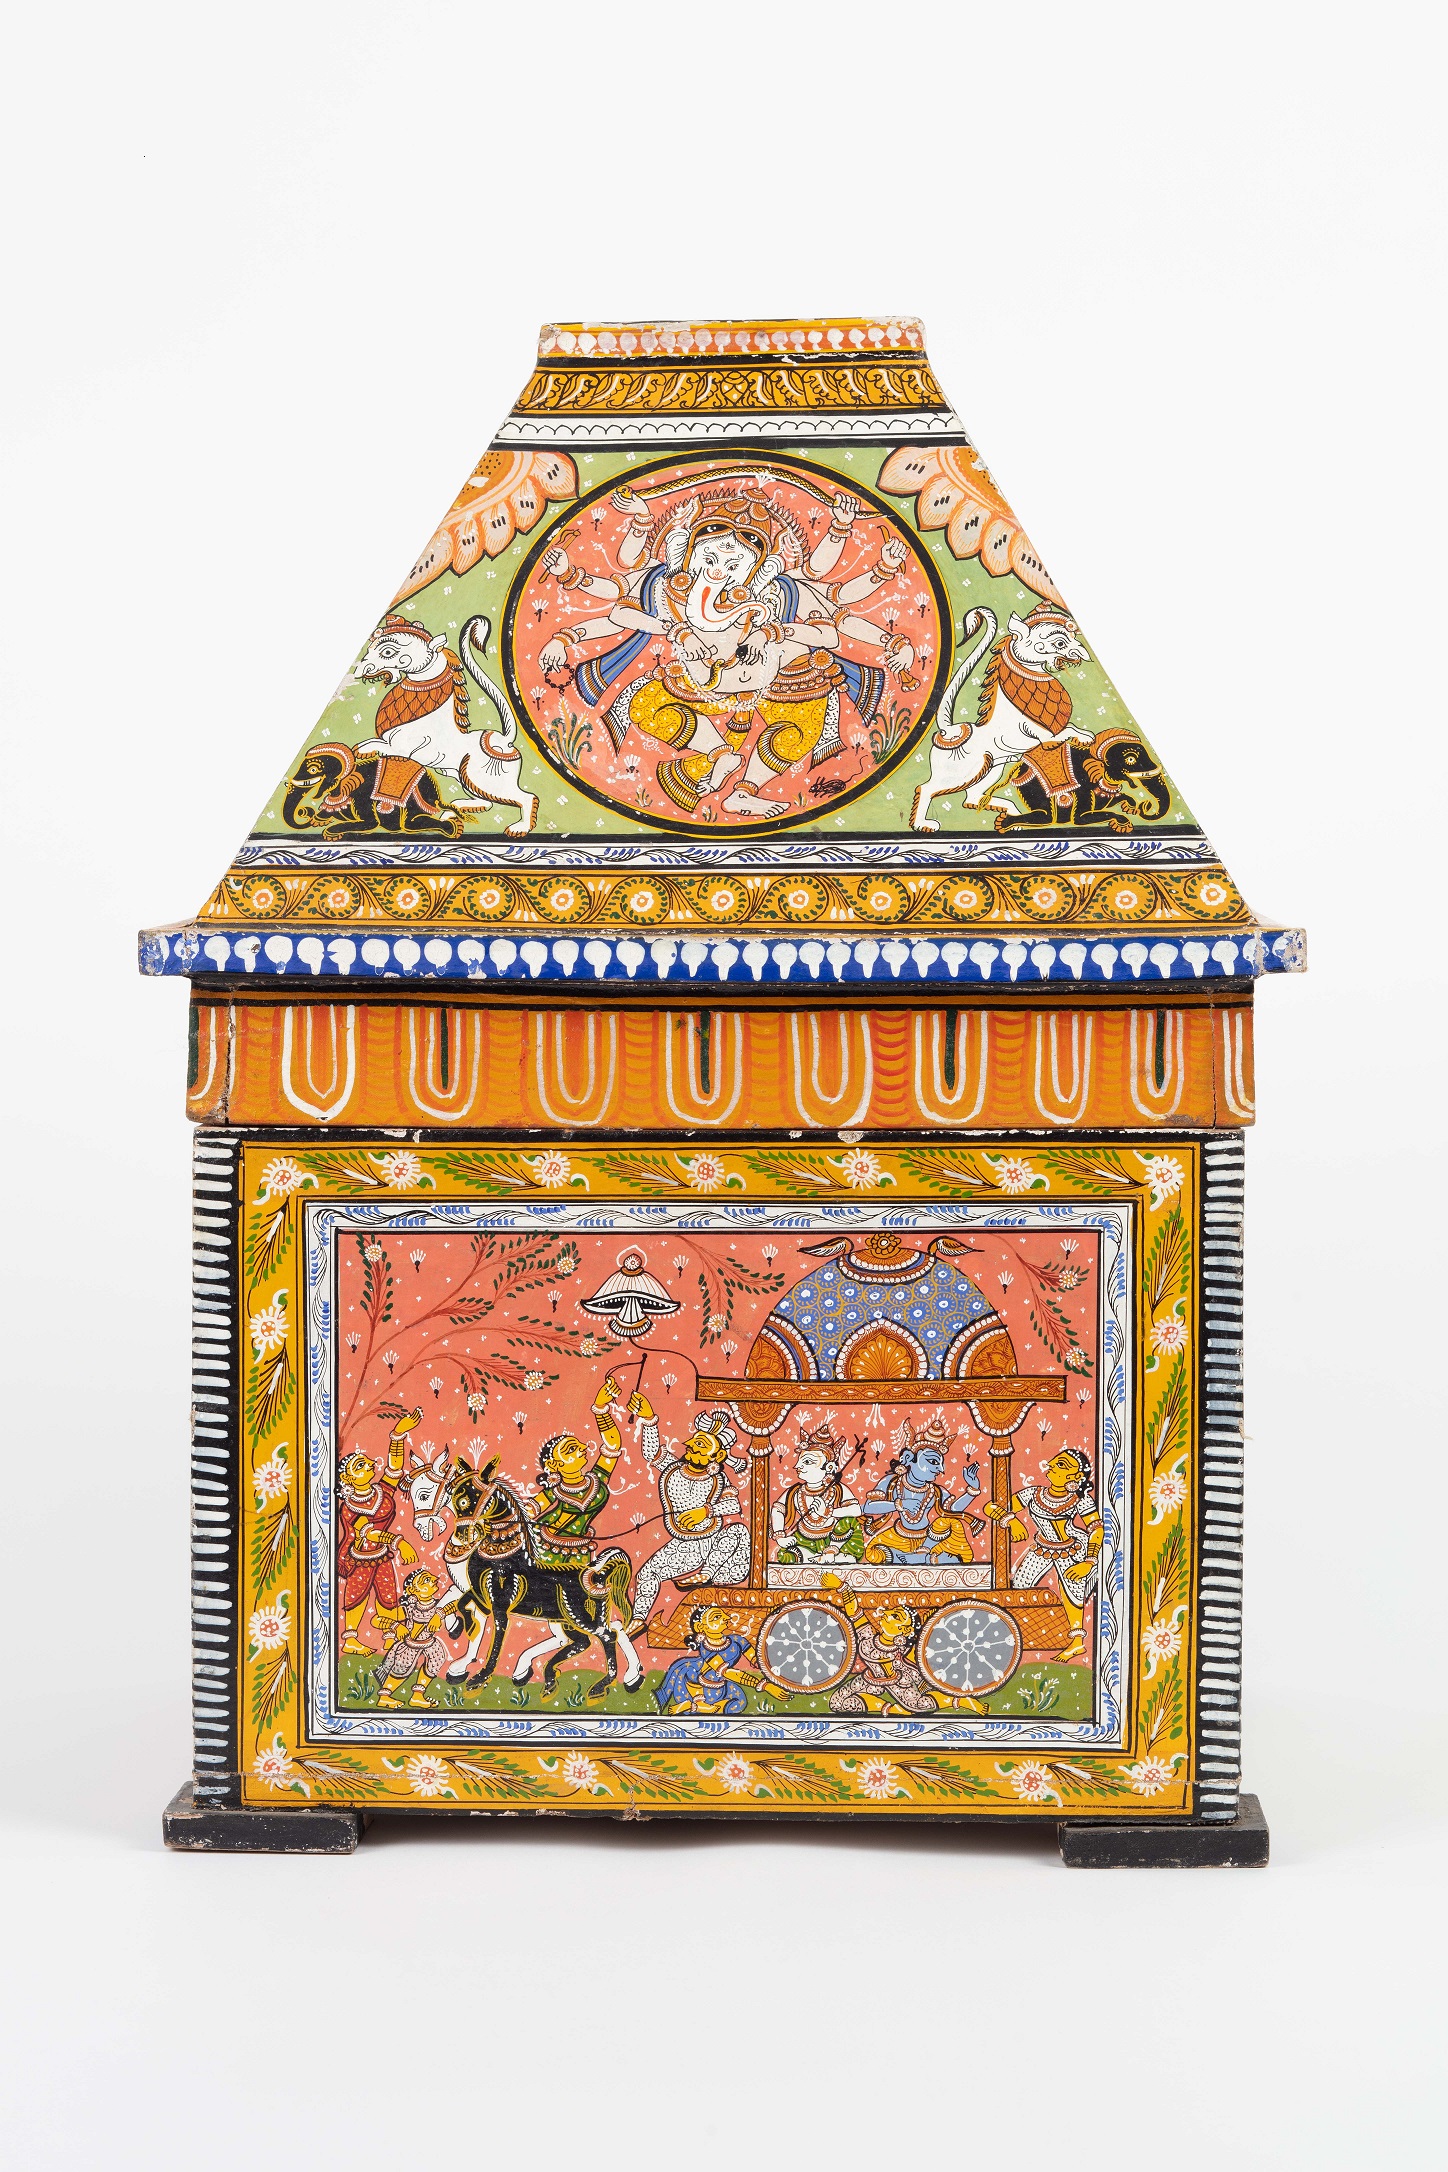 Painted dowry box from India as part of Bankfield's exhibition